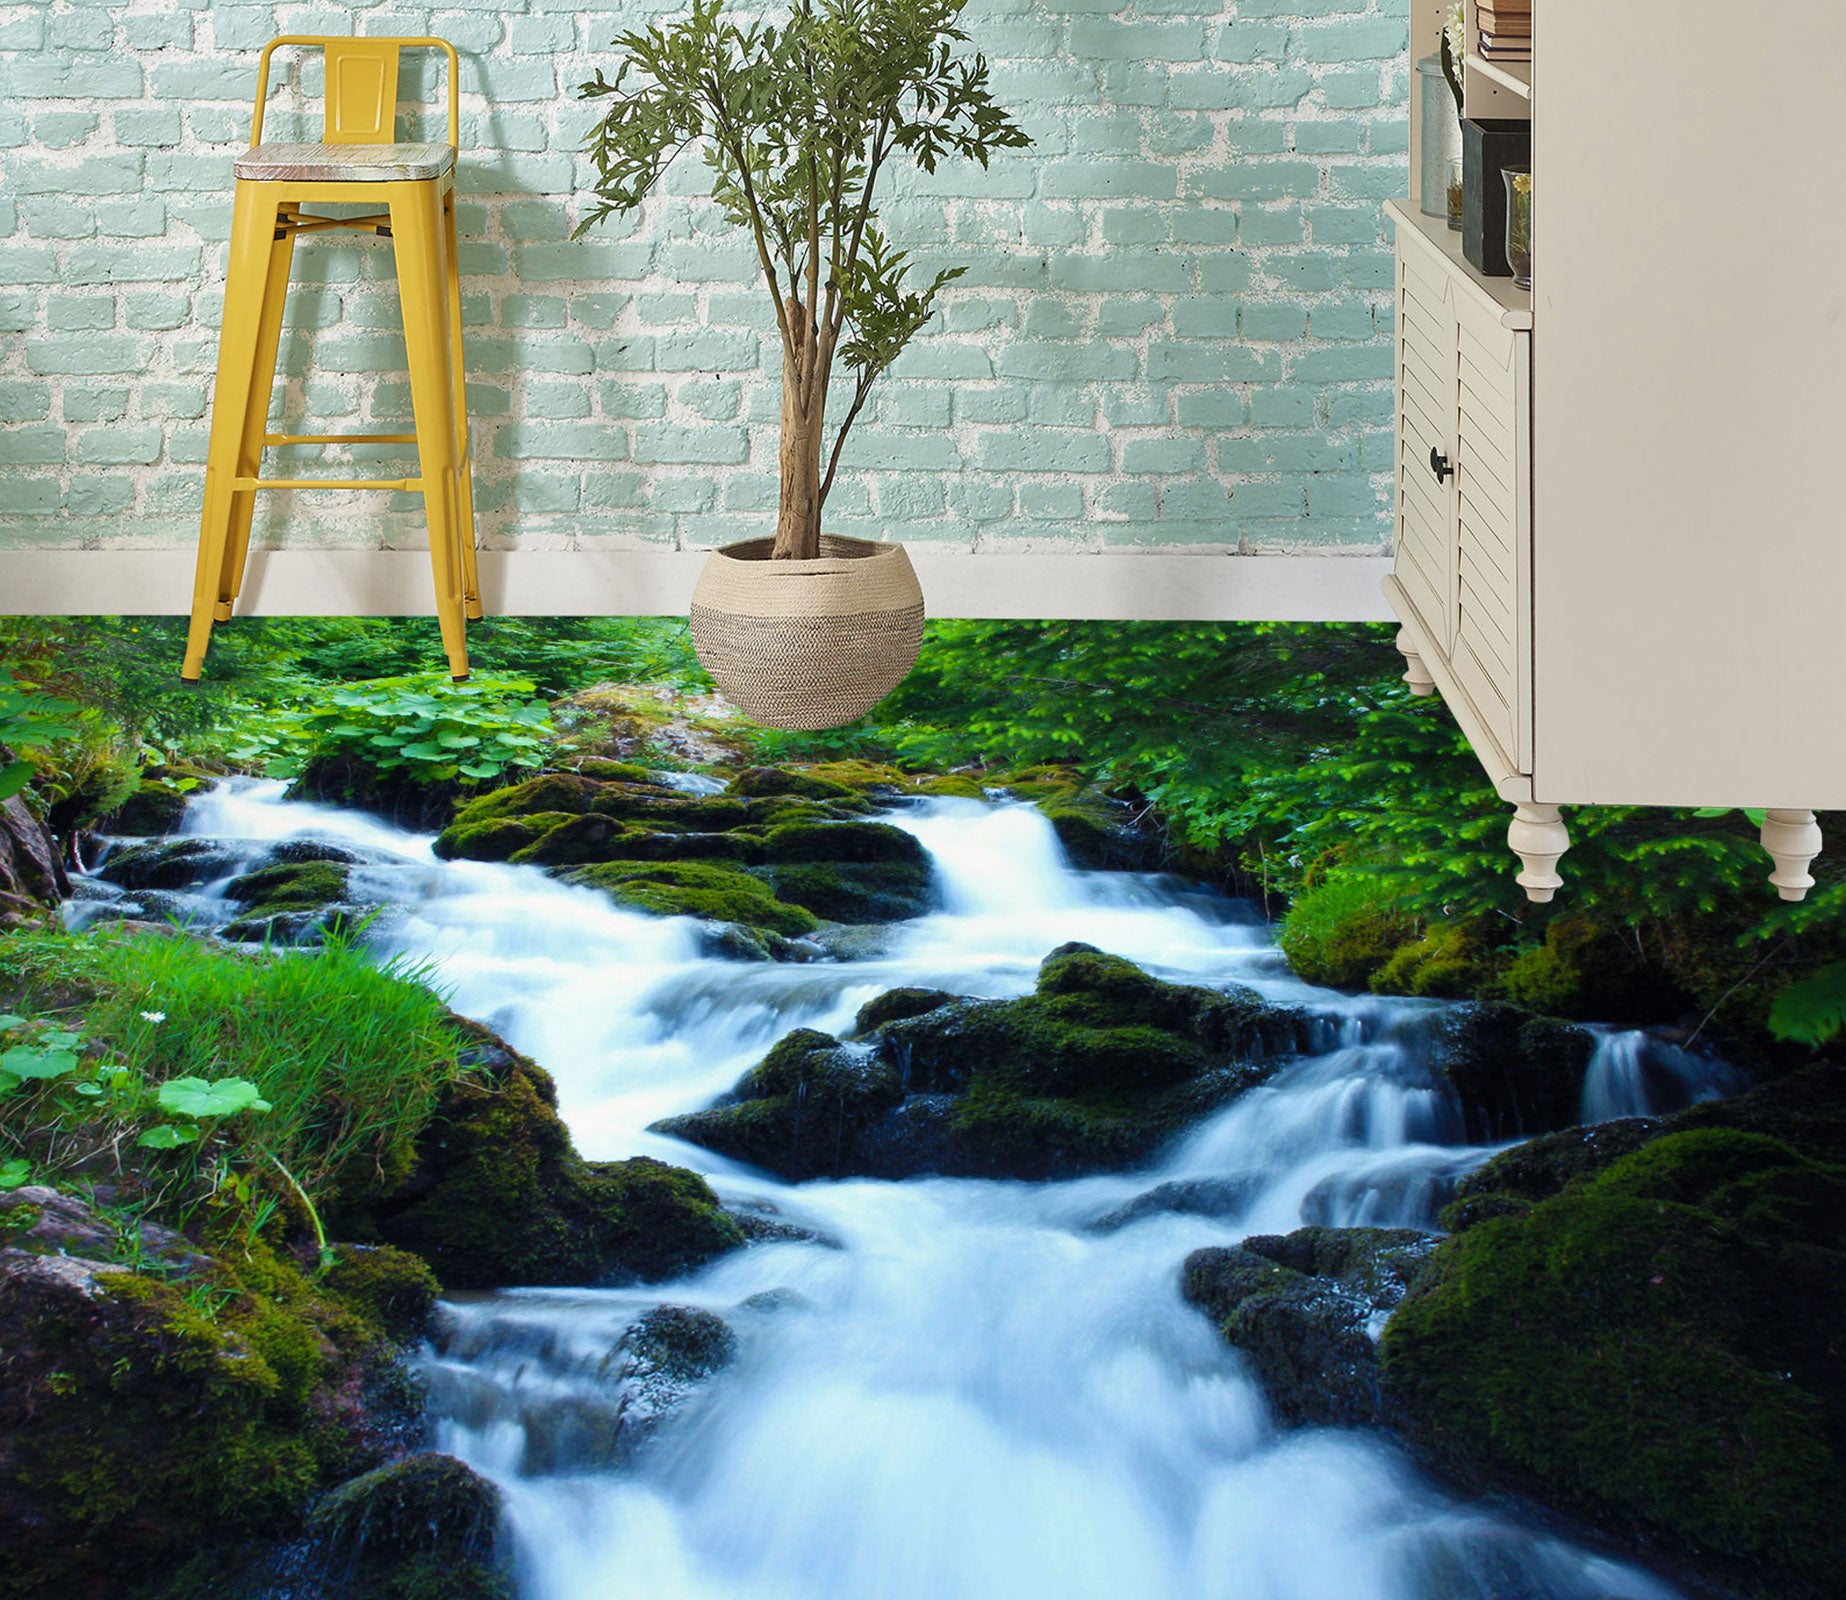 3D Rich White River 1037 Floor Mural  Wallpaper Murals Self-Adhesive Removable Print Epoxy